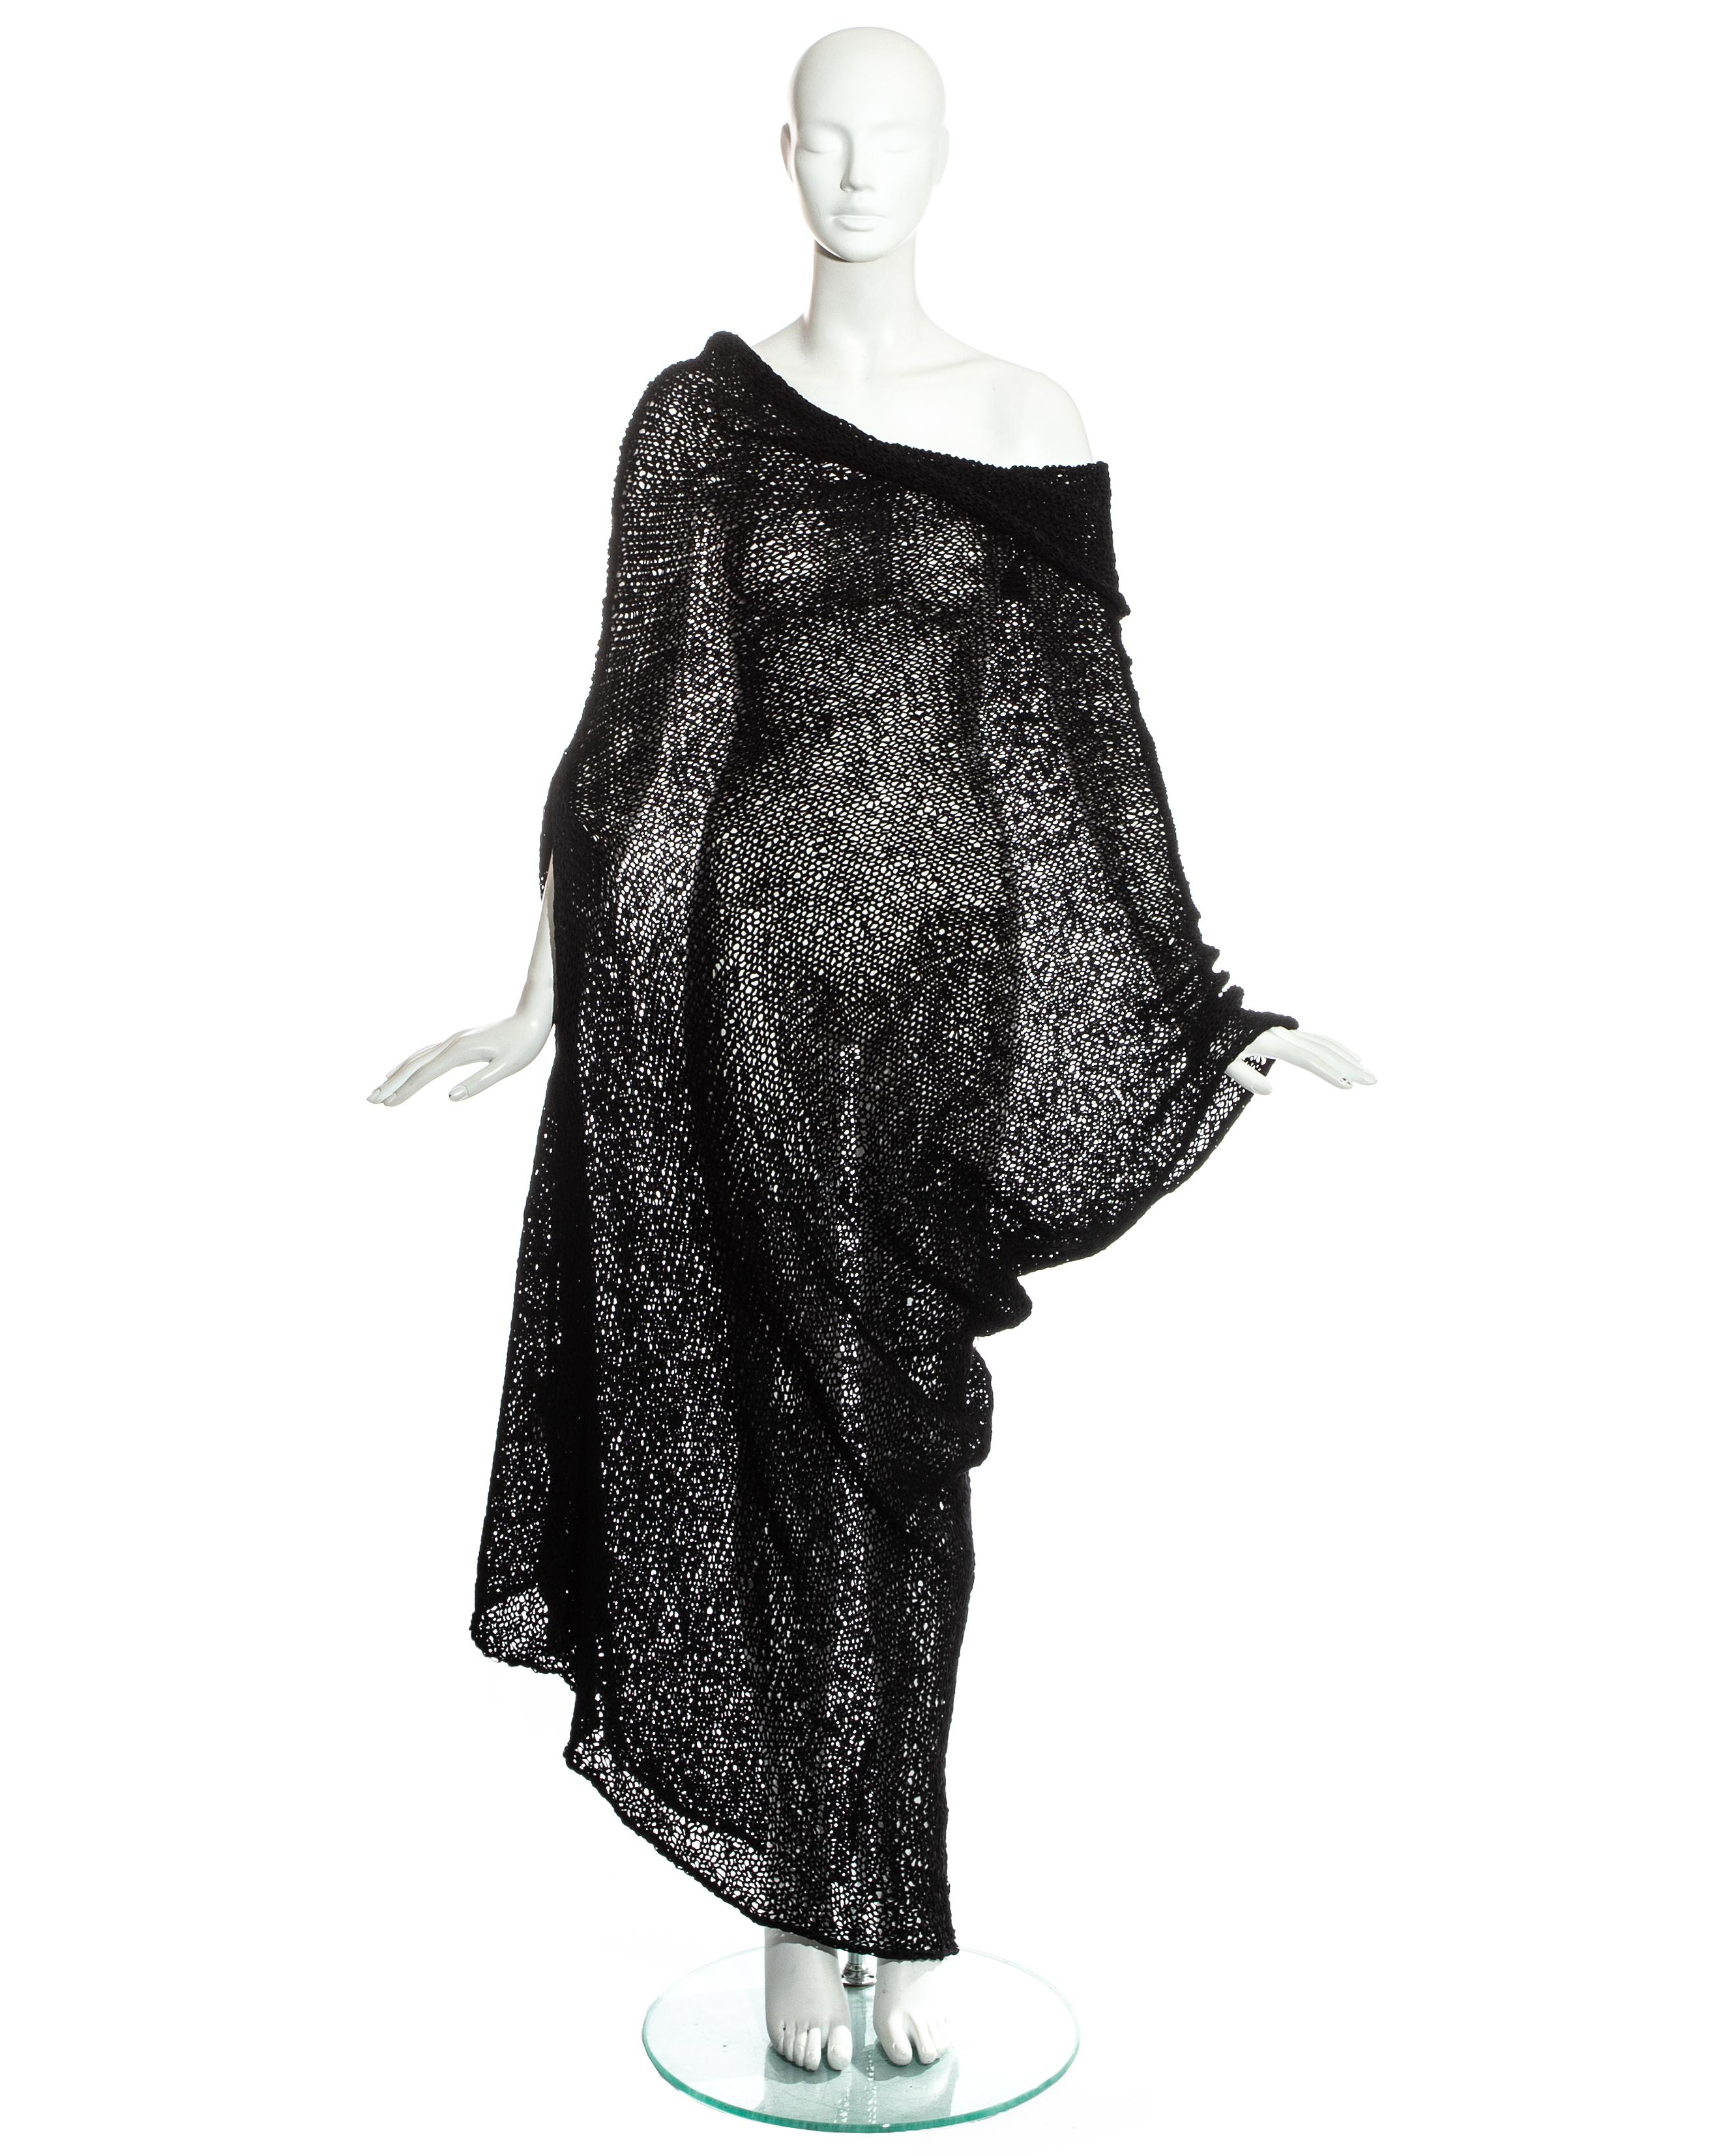 Comme des Garcons; black knitted raw silk dress. L-shaped, with elongated panel forming a cowl collar, slits for the arms and diagonal hem. Can be worn right side up or upside down.   

'Tricot - Hand Made' label   

Spring-Summer 1984 